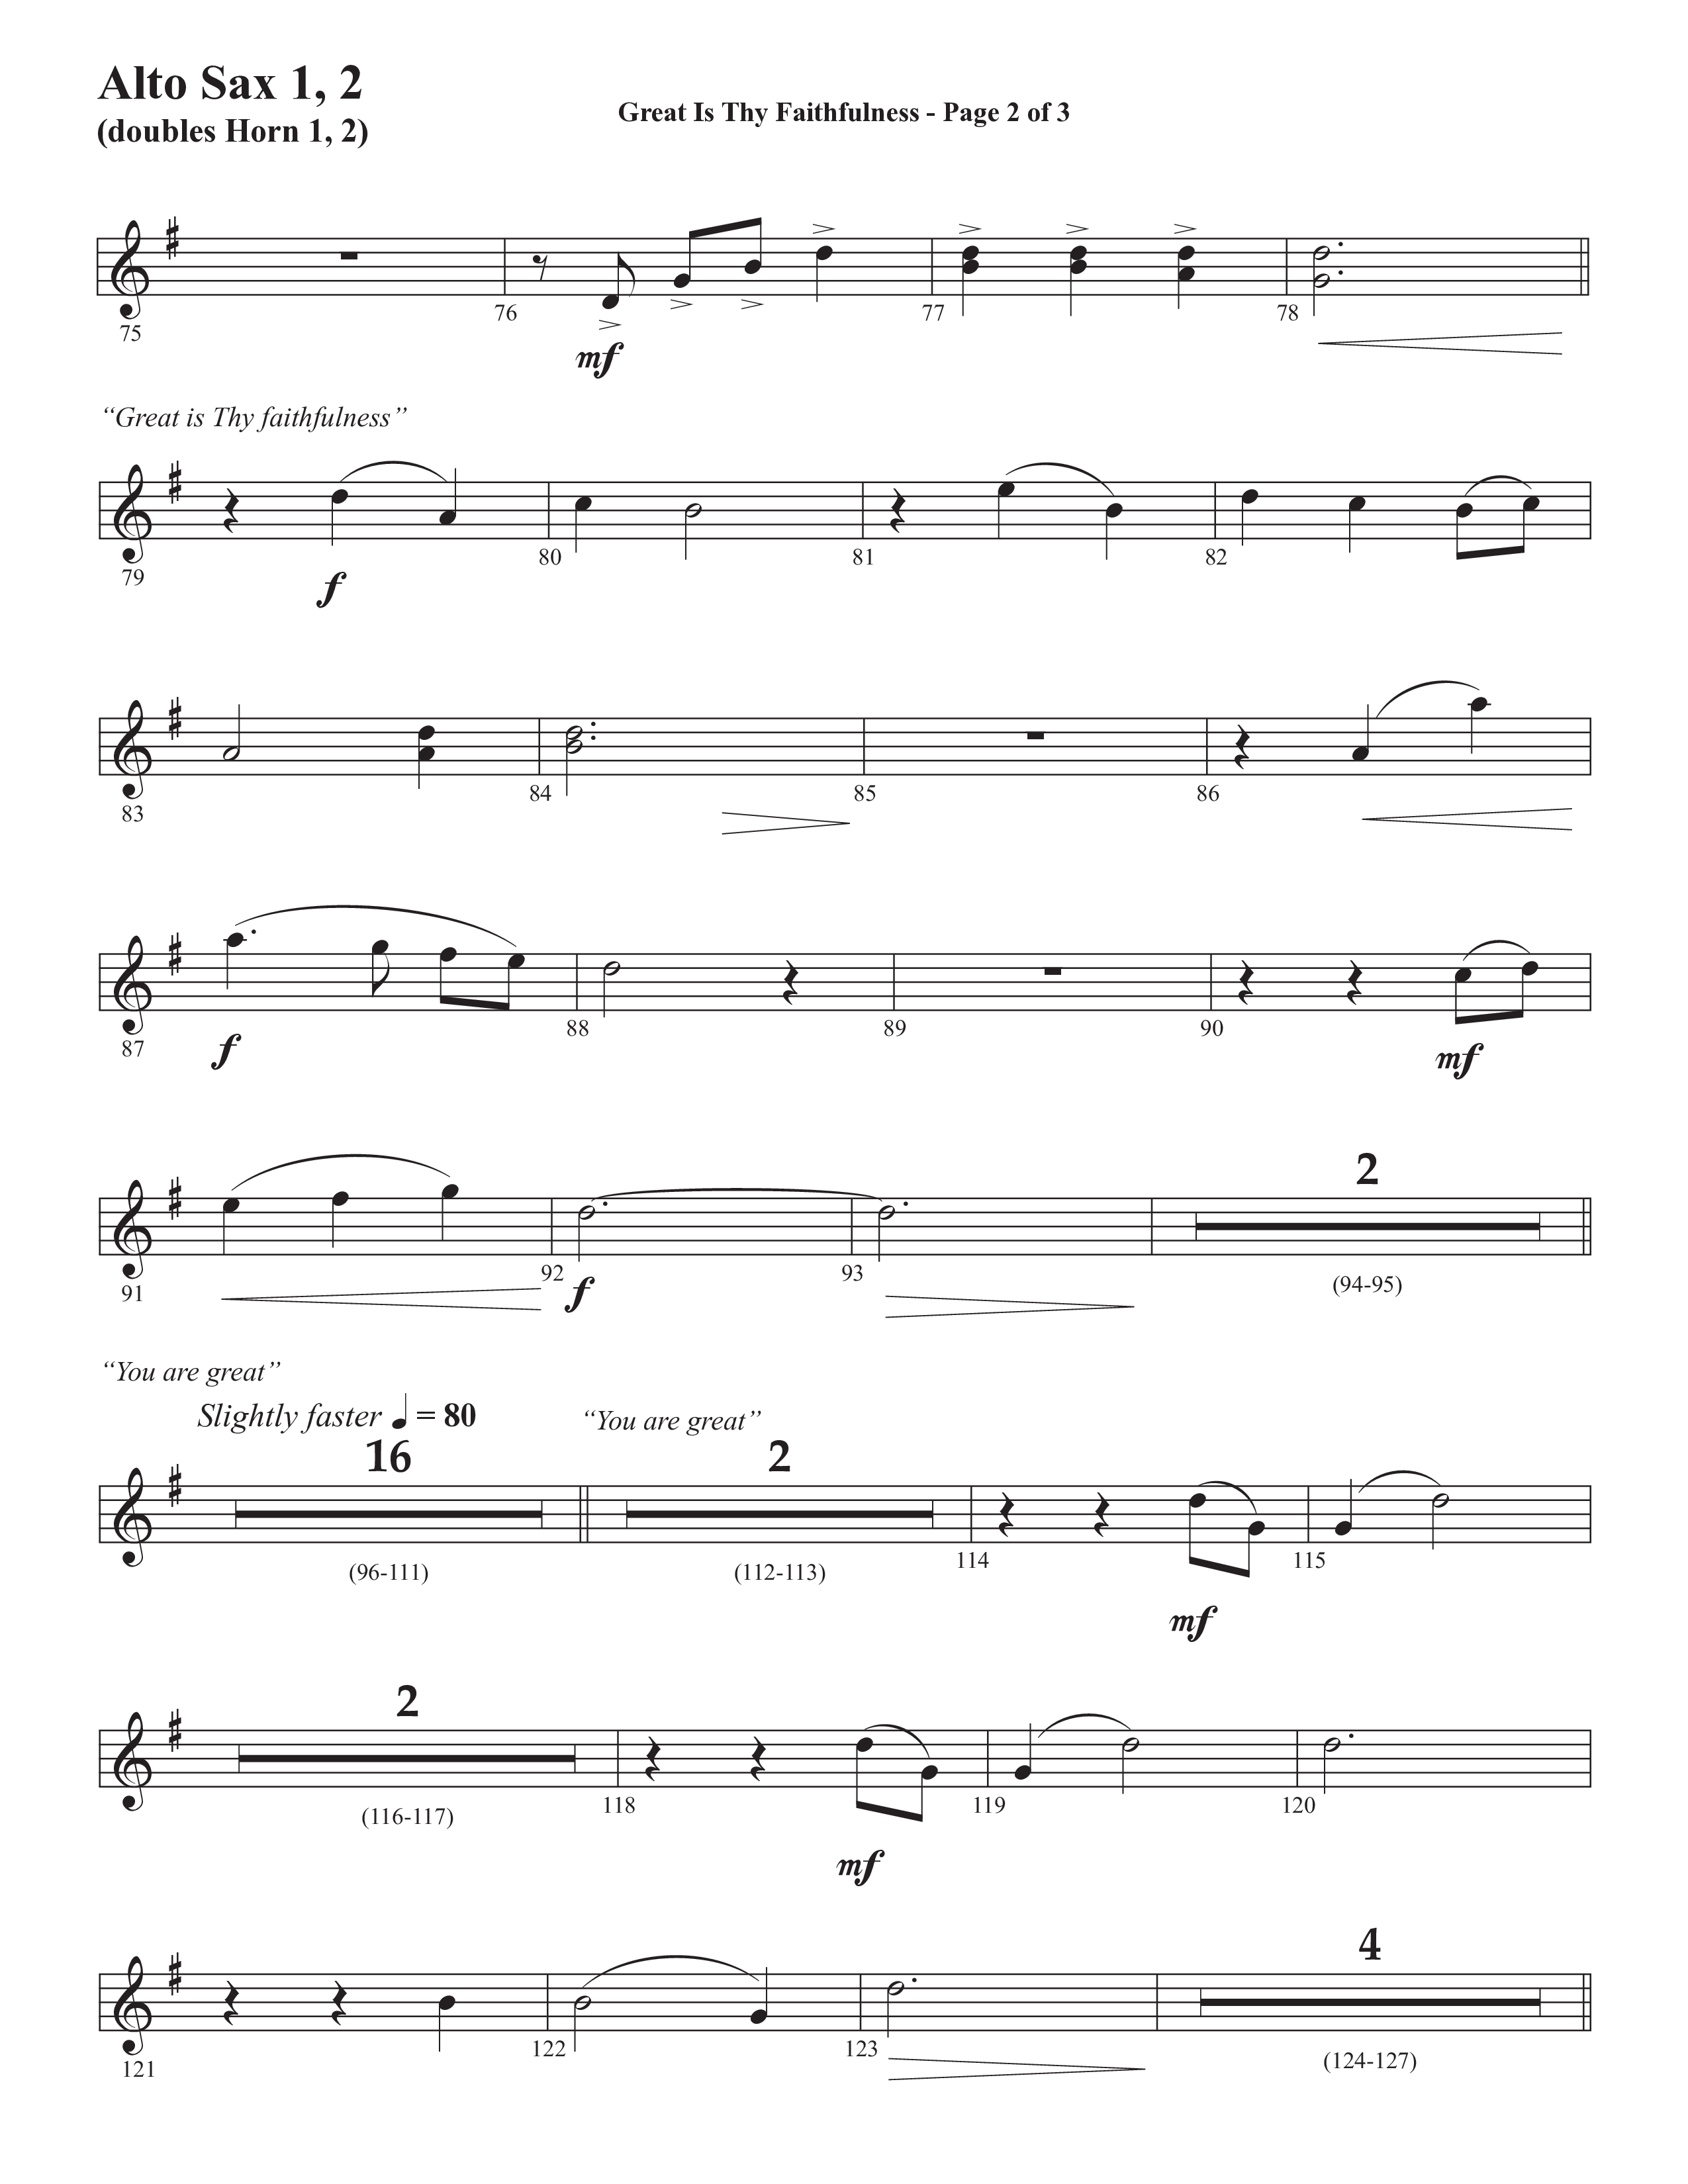 Great Is Thy Faithfulness (You Are Great) (Choral Anthem SATB) Alto Sax 1/2 (Semsen Music / Arr. John Bolin / Orch. David Shipps)